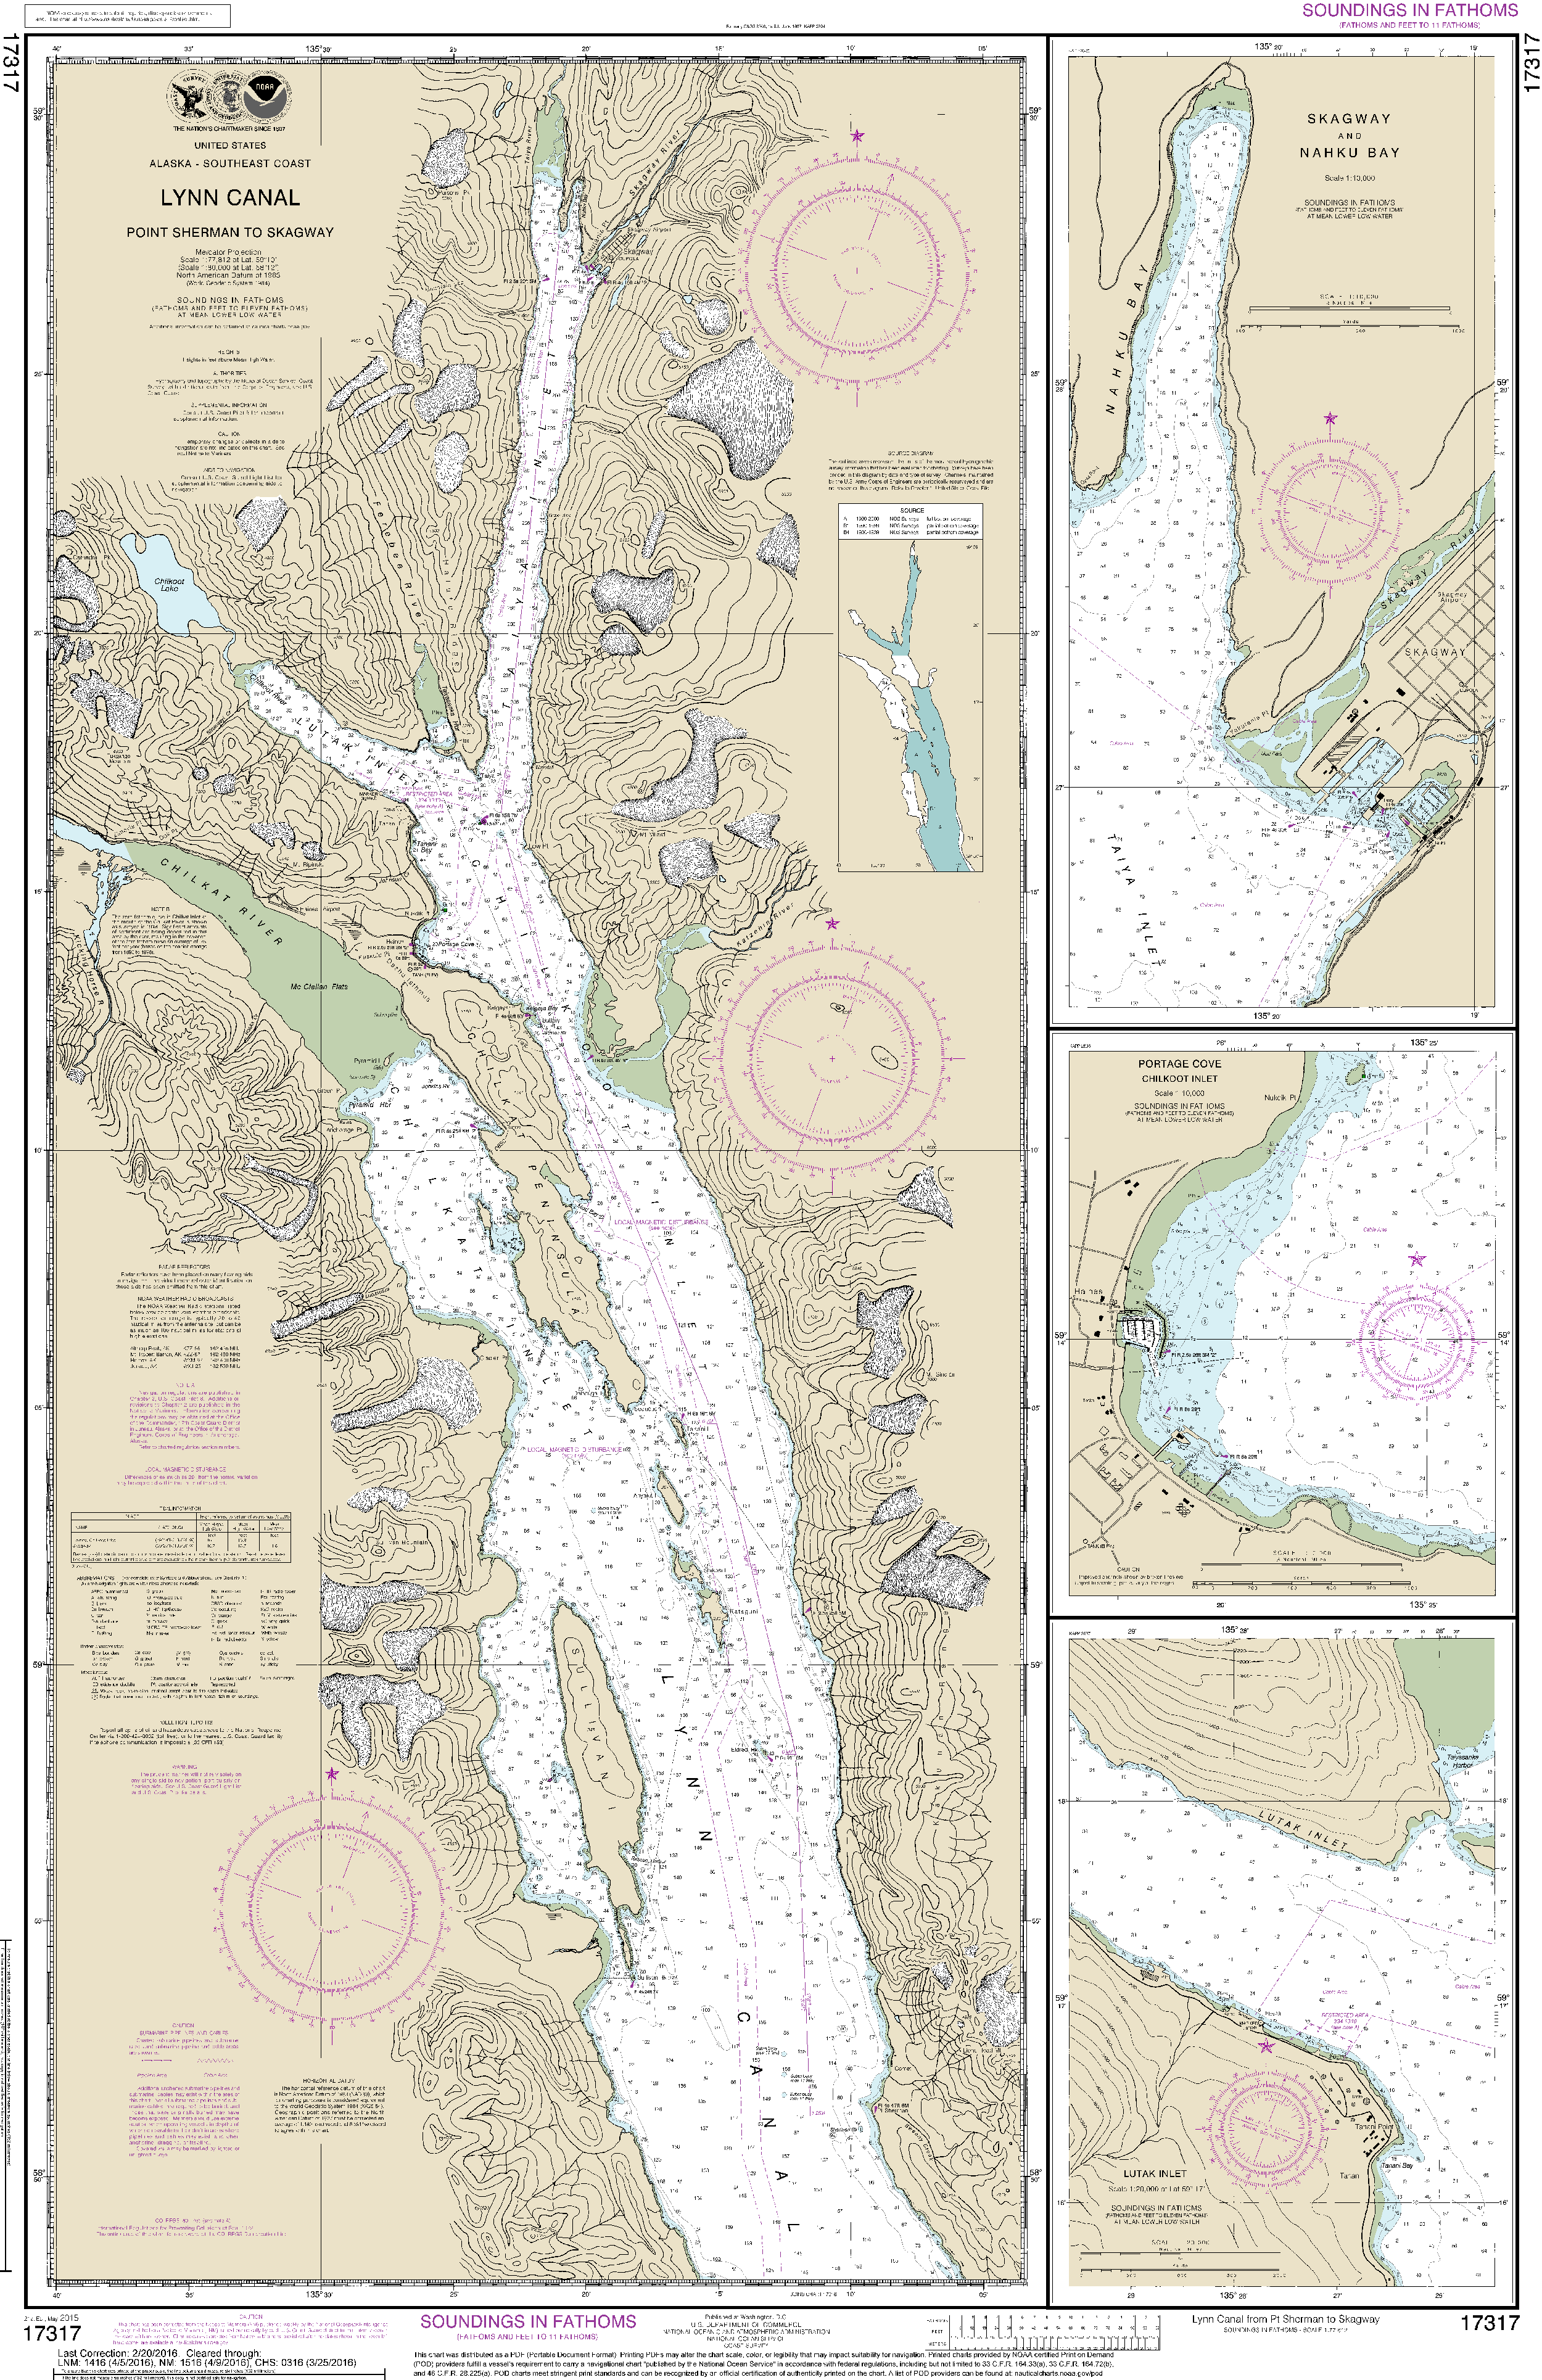 NOAA Nautical Chart 17317: Lynn Canal-Point Sherman to Skagway;Lutak Inlet;Skagway and Nahku Bay;Portage Cove, Chilkoot Inlet